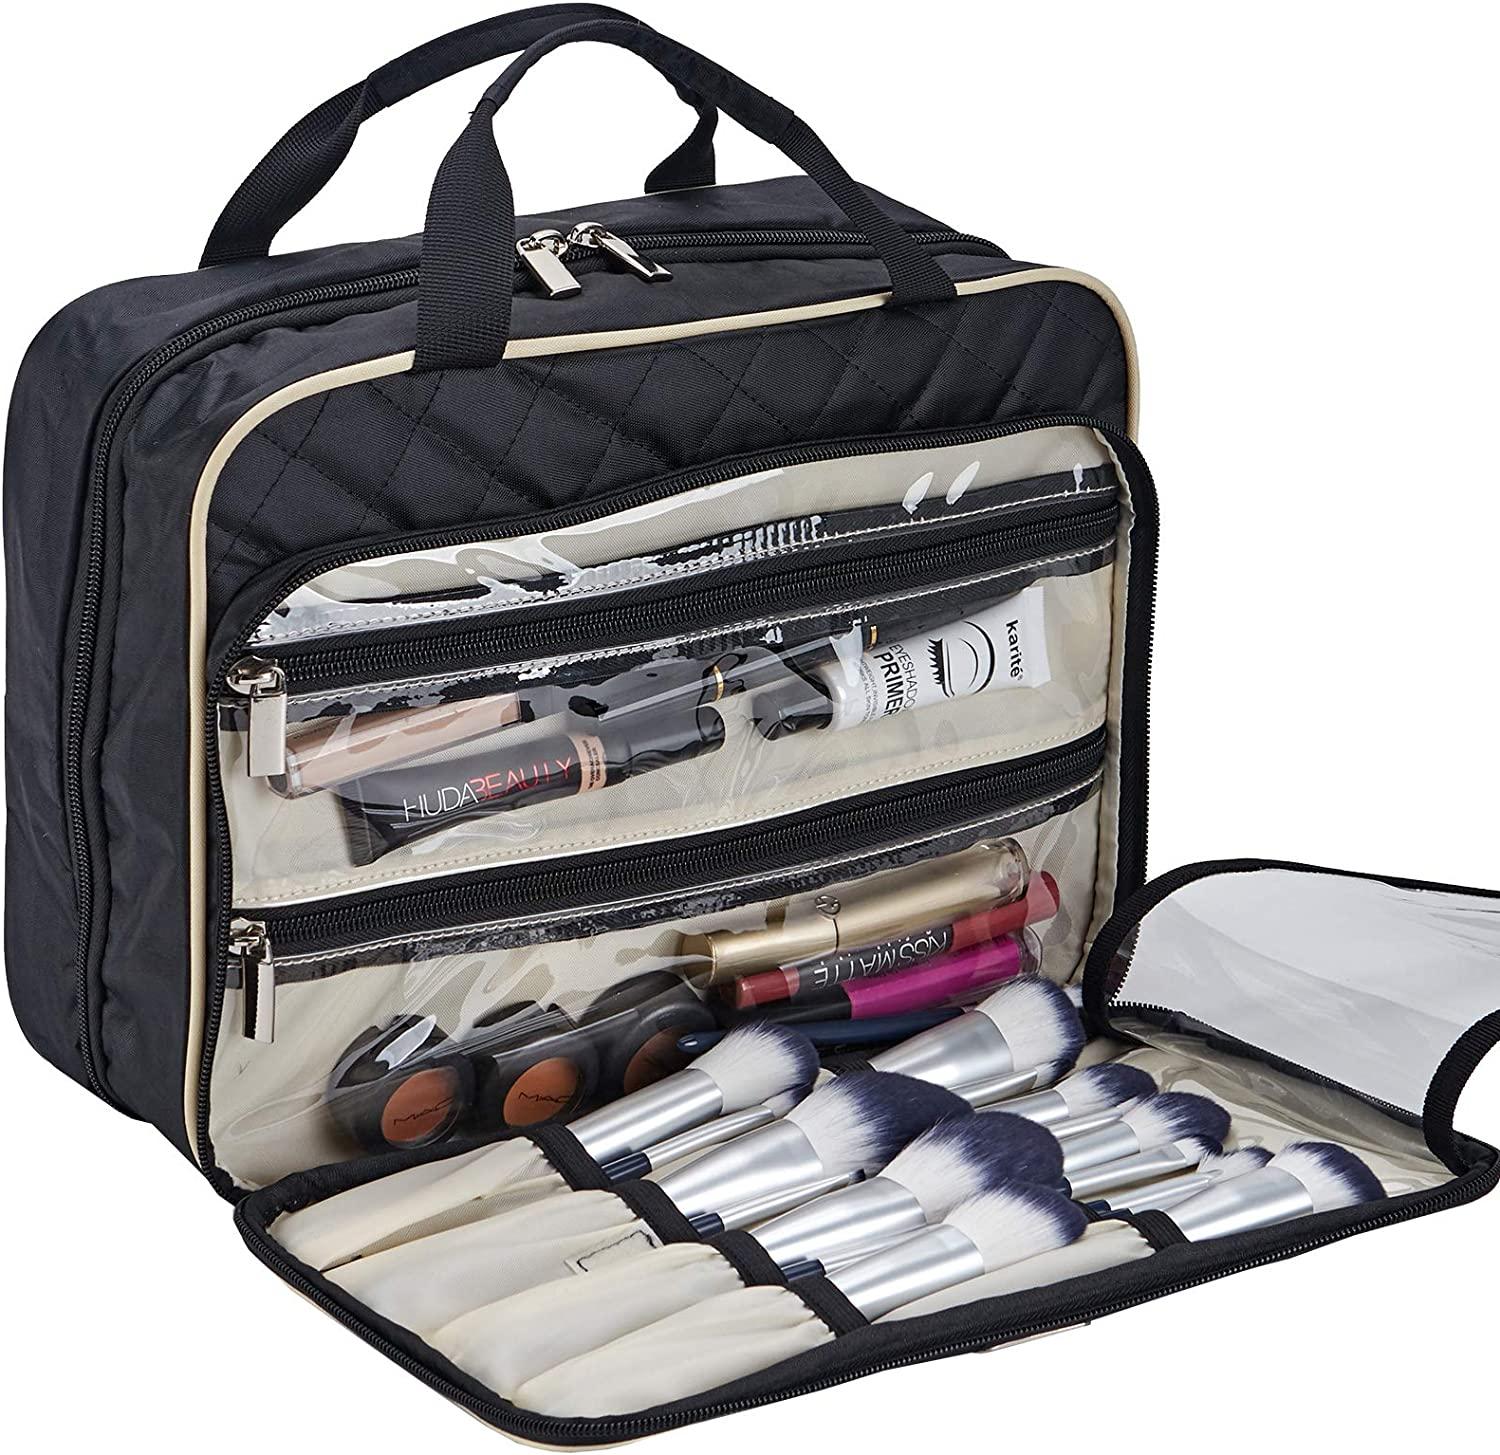 Shop Extra Large Hanging Toiletry Bag With Cu – Luggage Factory